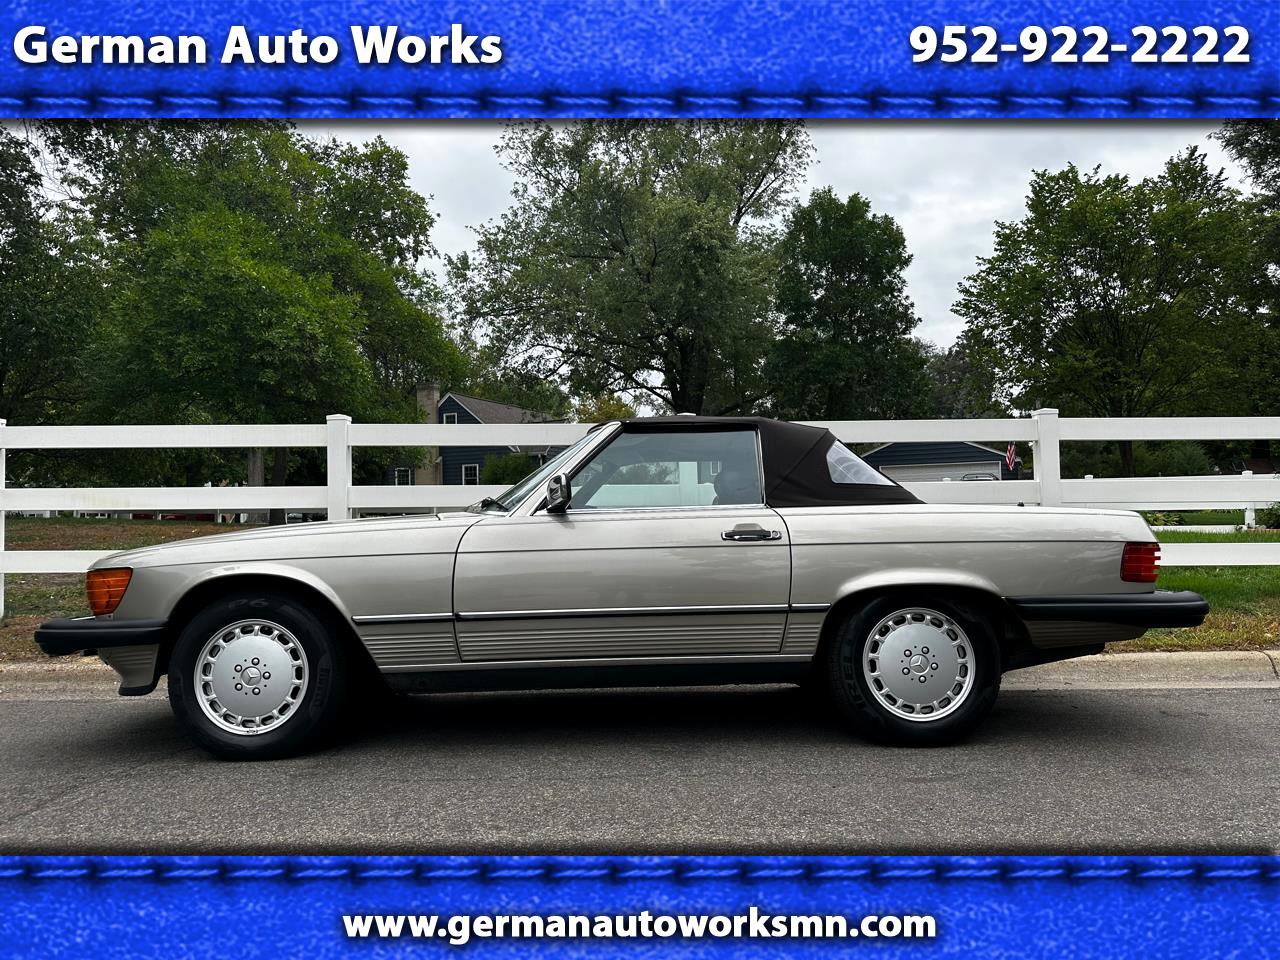 Mercedes-Benz 560 Series 2dr Coupe 560SL Roadster 1989